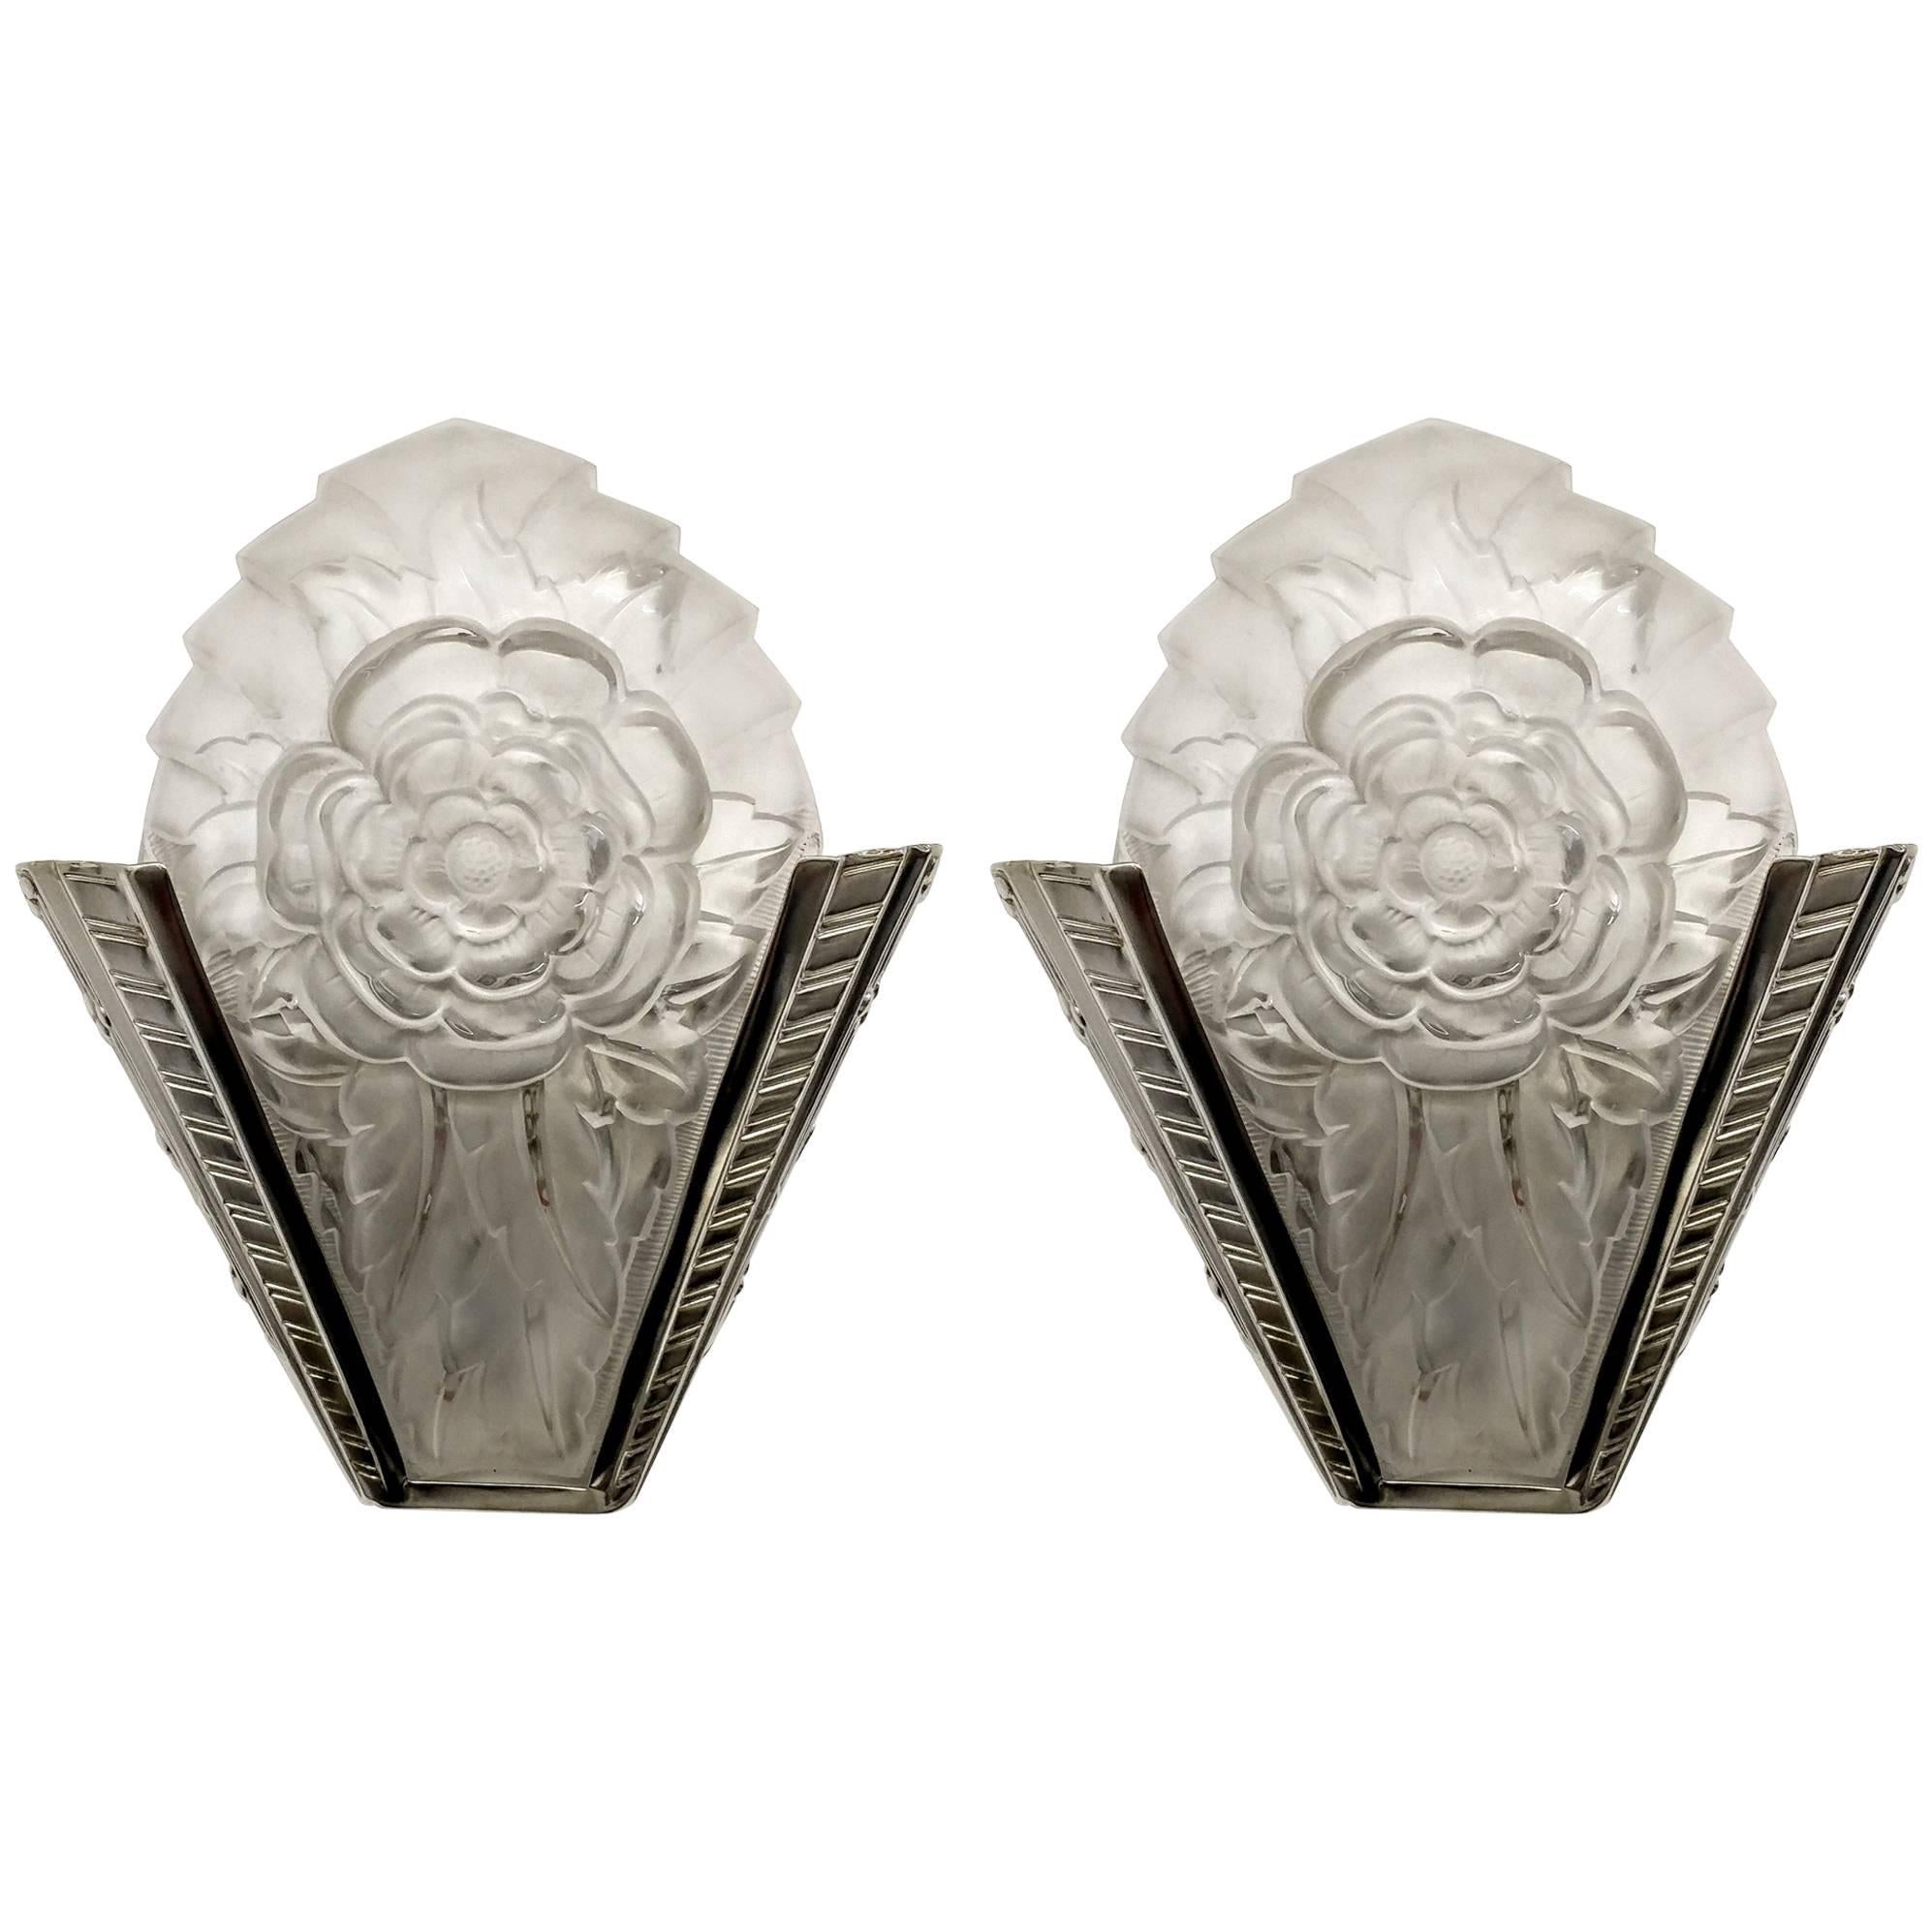 A pair of French Art Deco wall sconces are signed by the French artist 